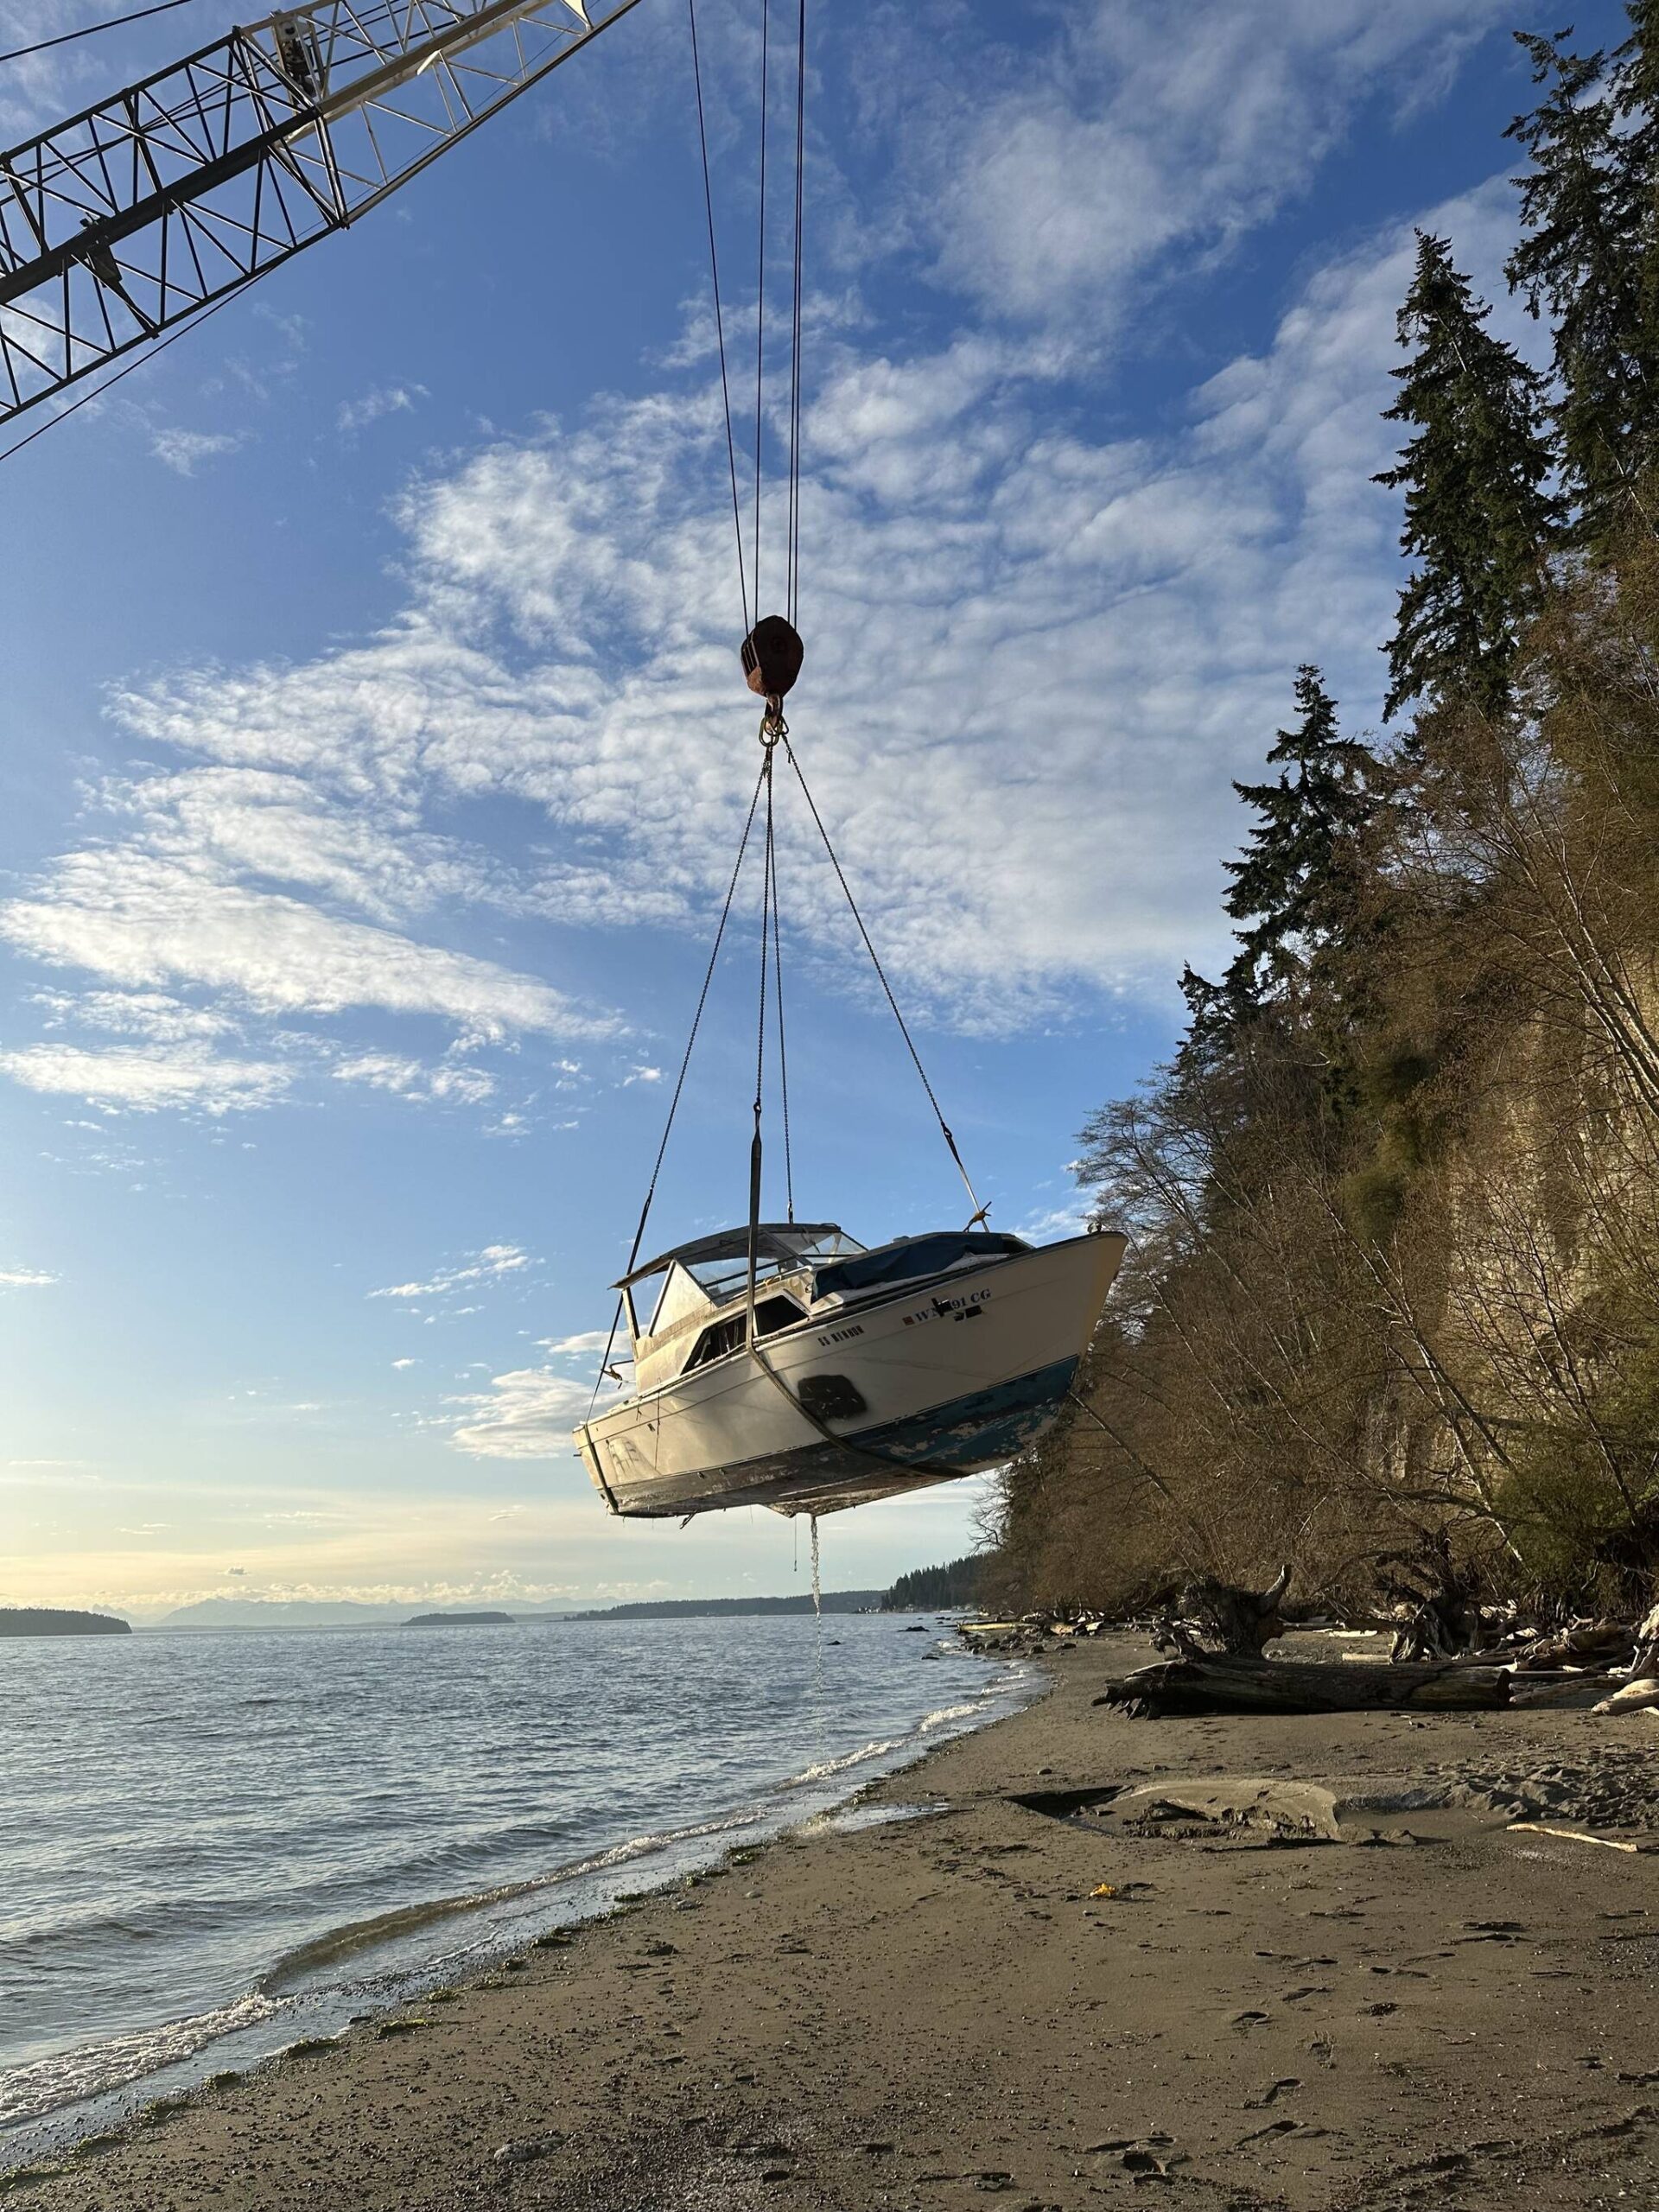 Photos provided
The Washington State Department of Natural Resources and the Island County Marine Resources Committee coordinate to remove derelict vessels from the Whidbey Island shoreline.